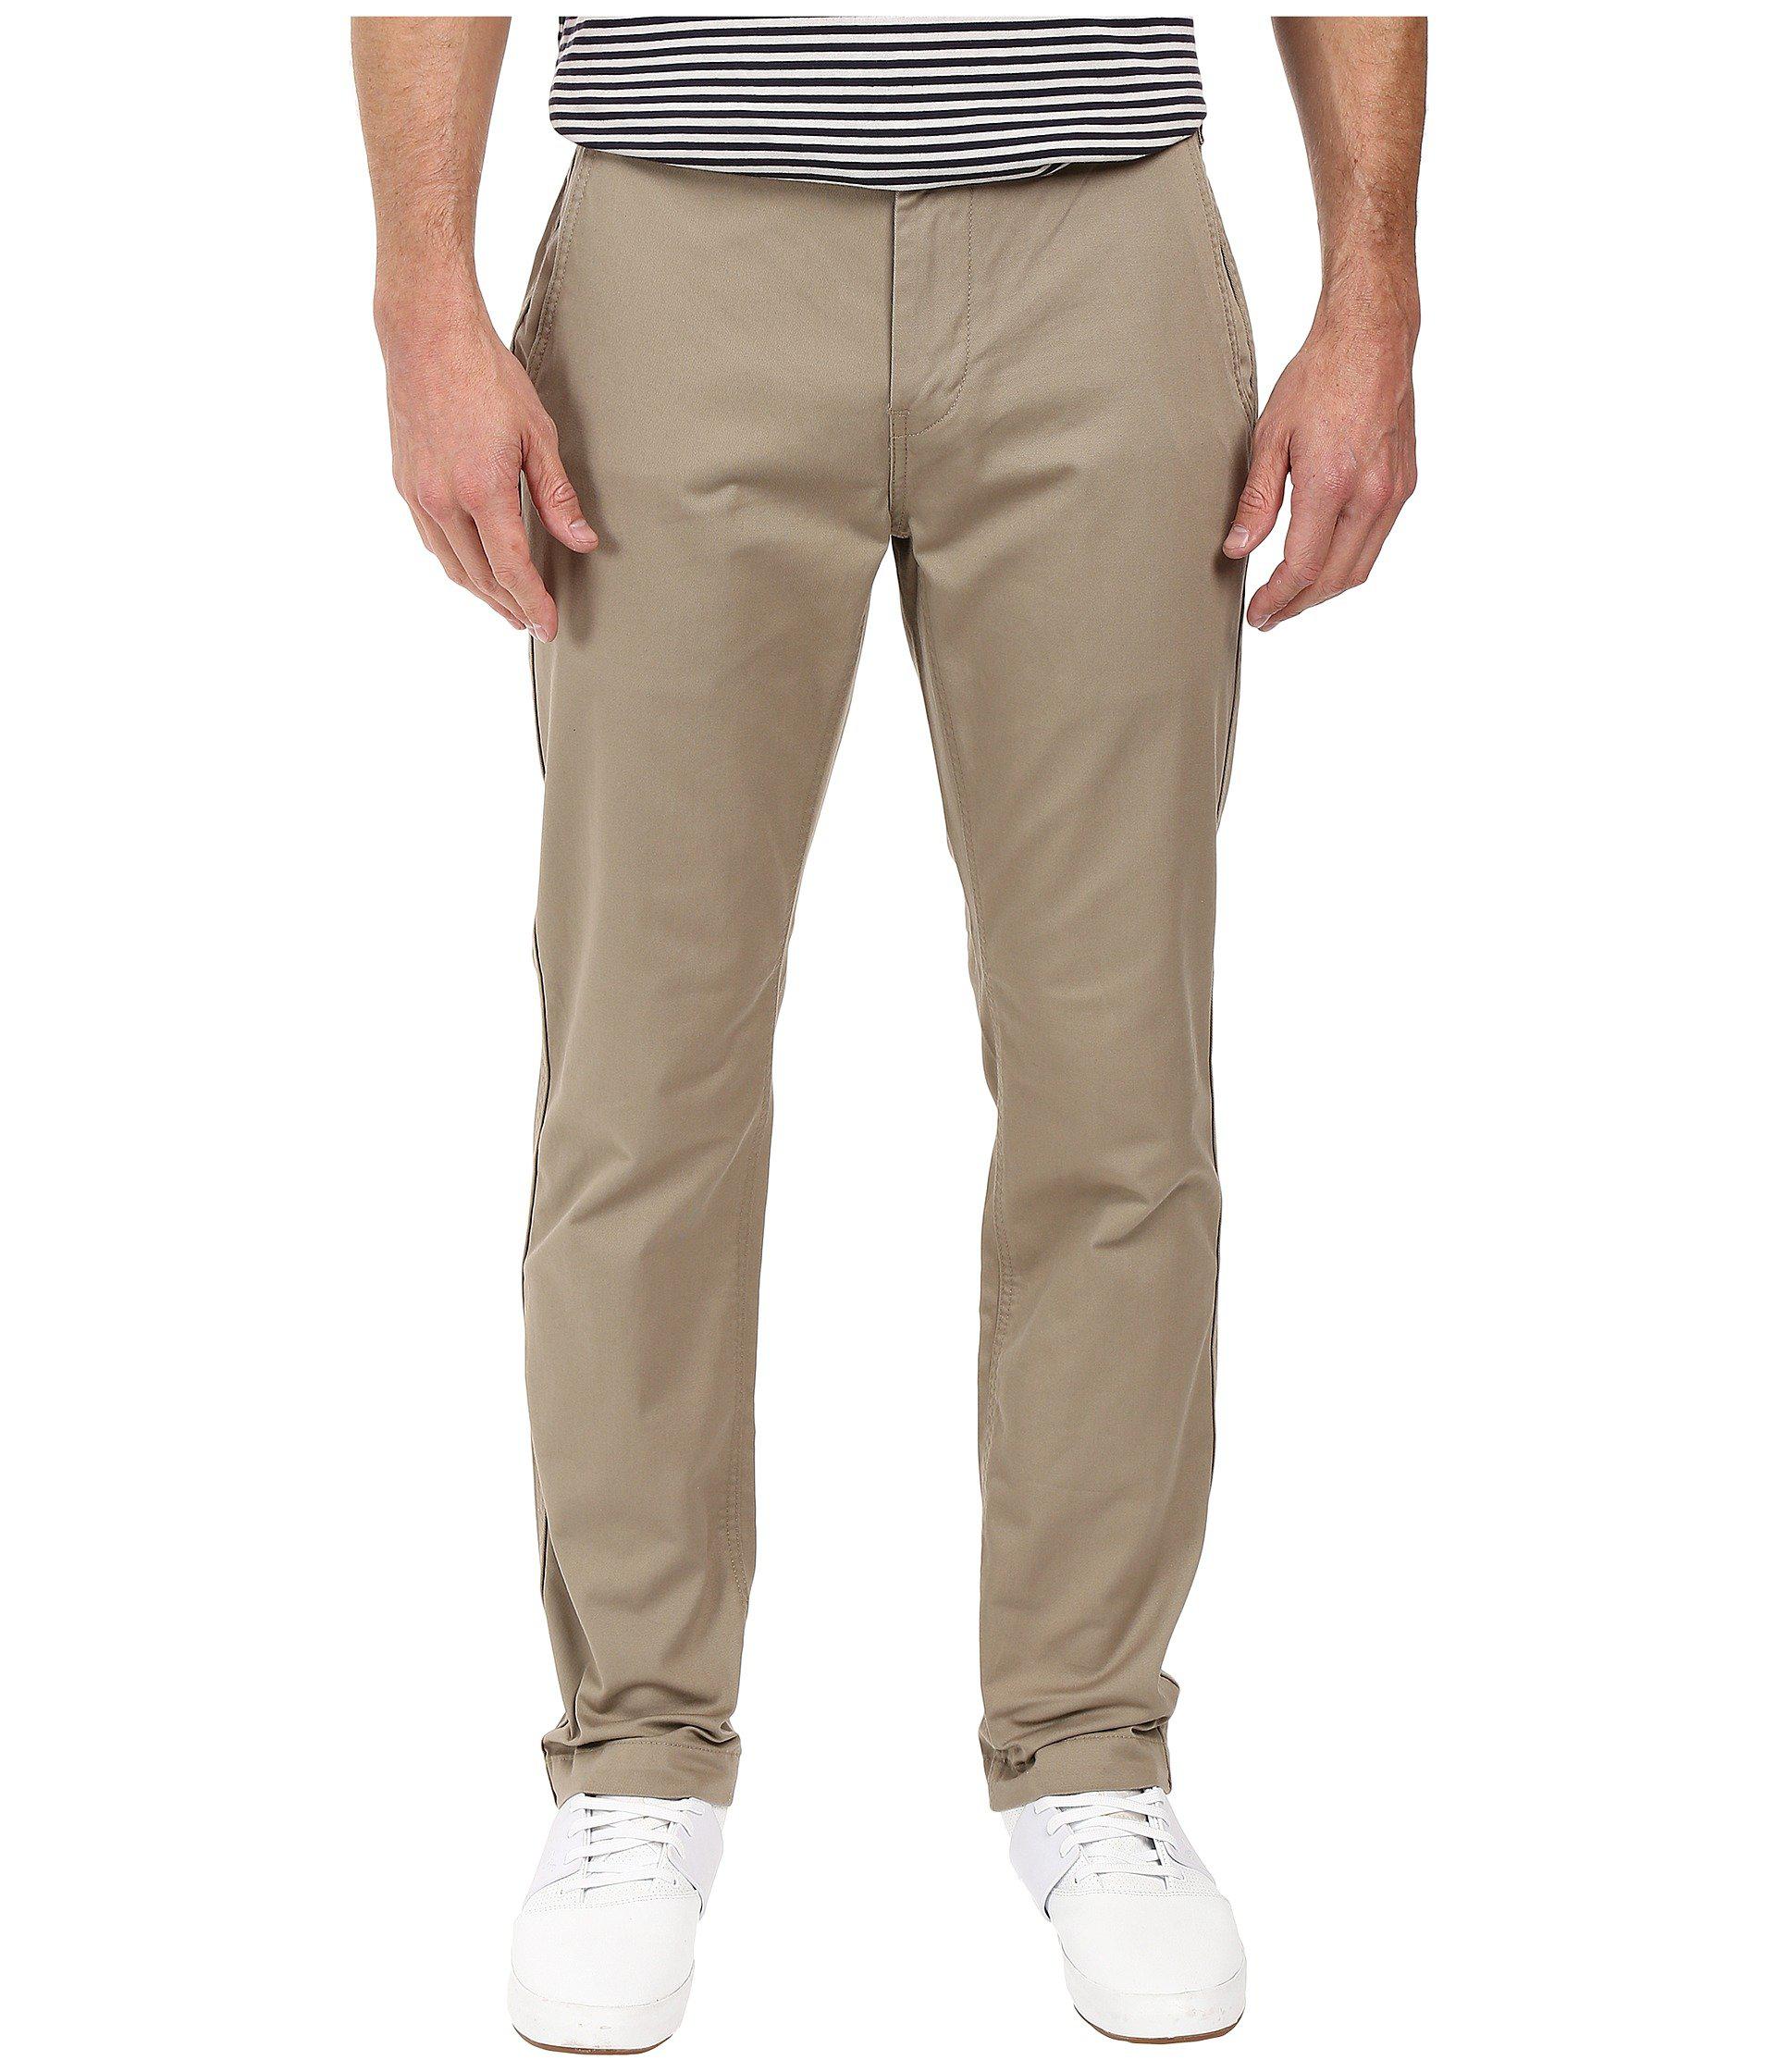 men's 541 athletic fit chino pant